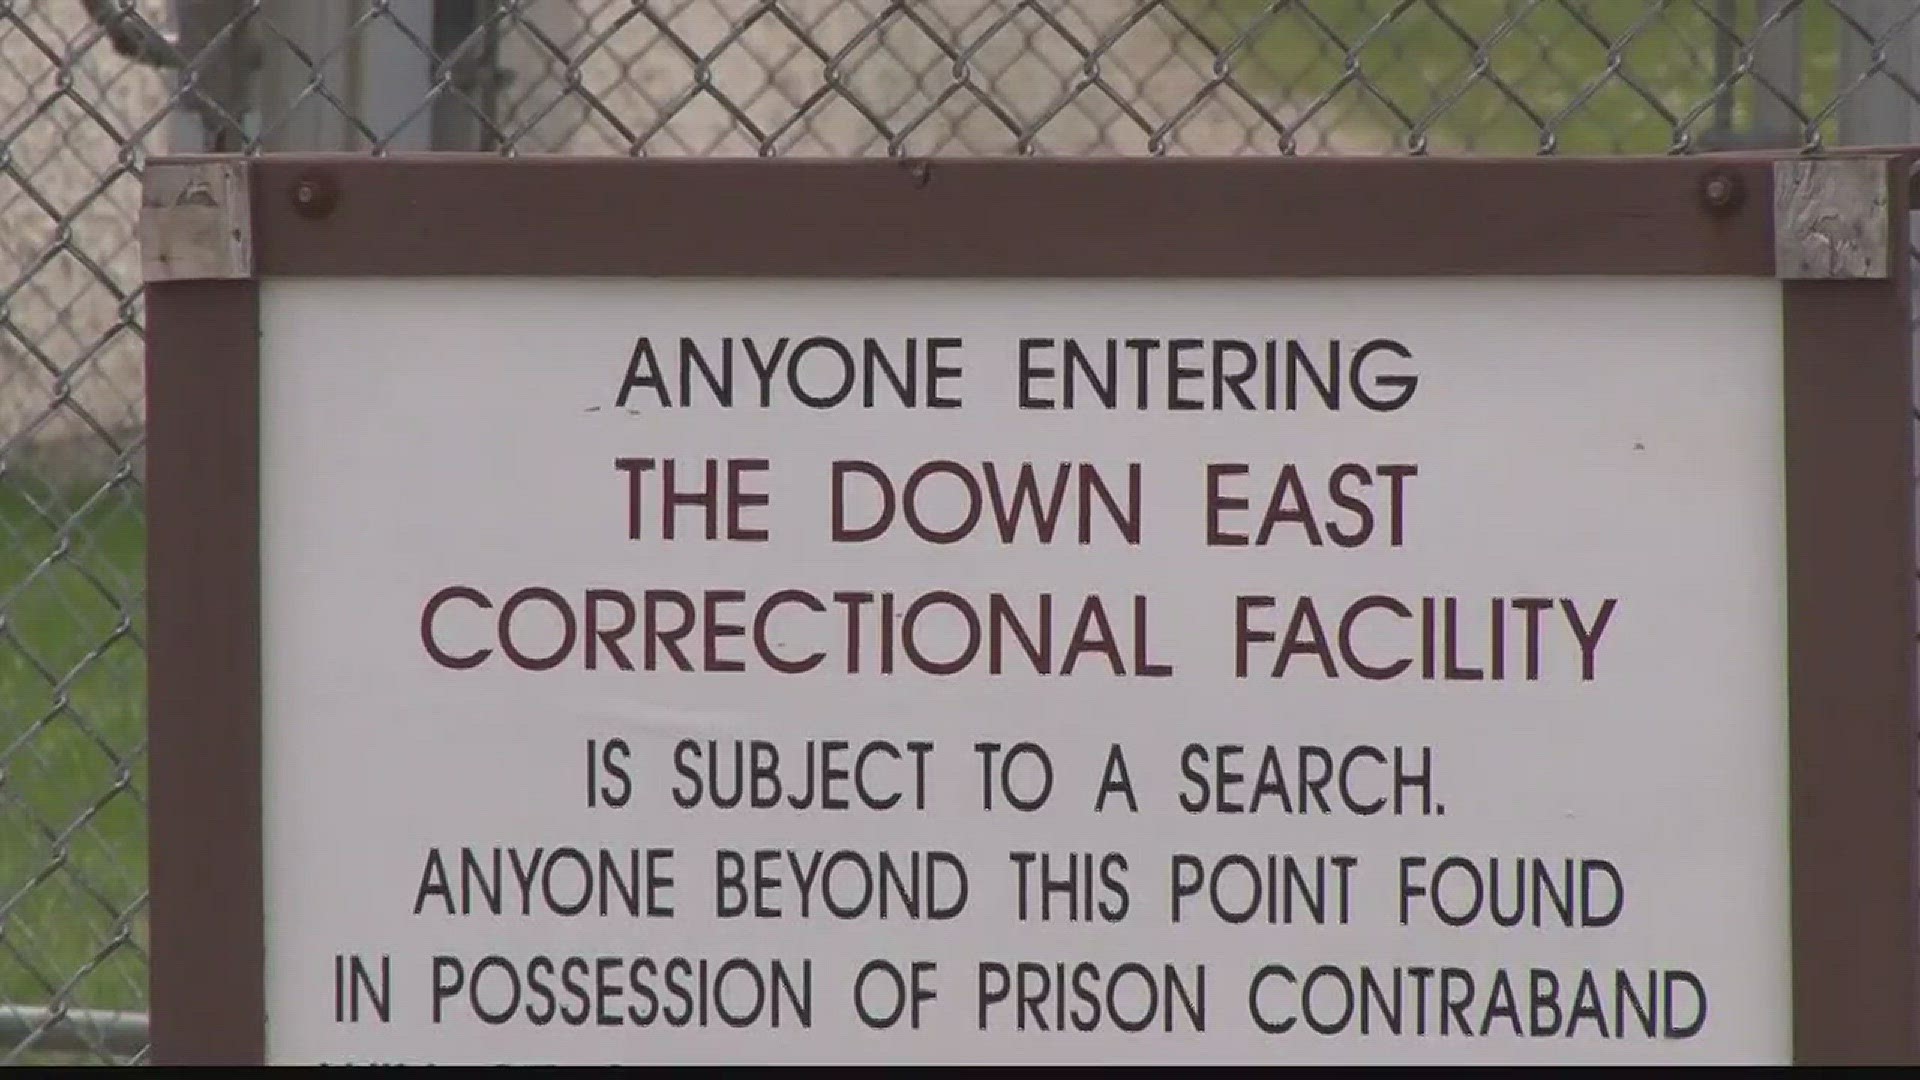 The LePage Administration has reportedly decided to keep the Downeast Correctional Facility open a while longer.